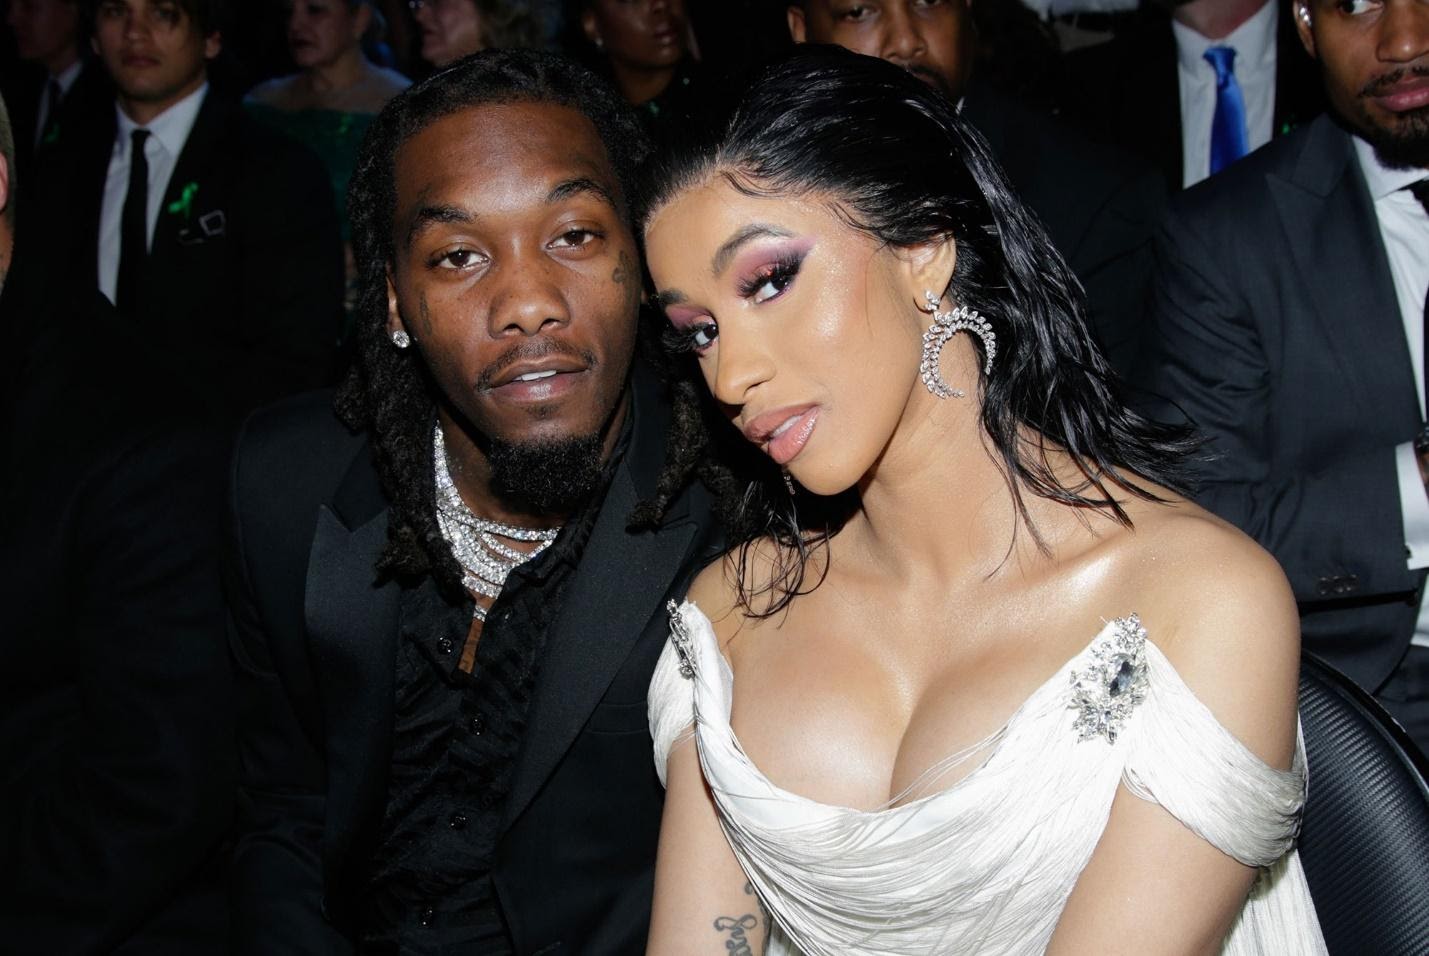 Cardi B’s divorce papers amended as she demands ‘amicable’ split from Offset